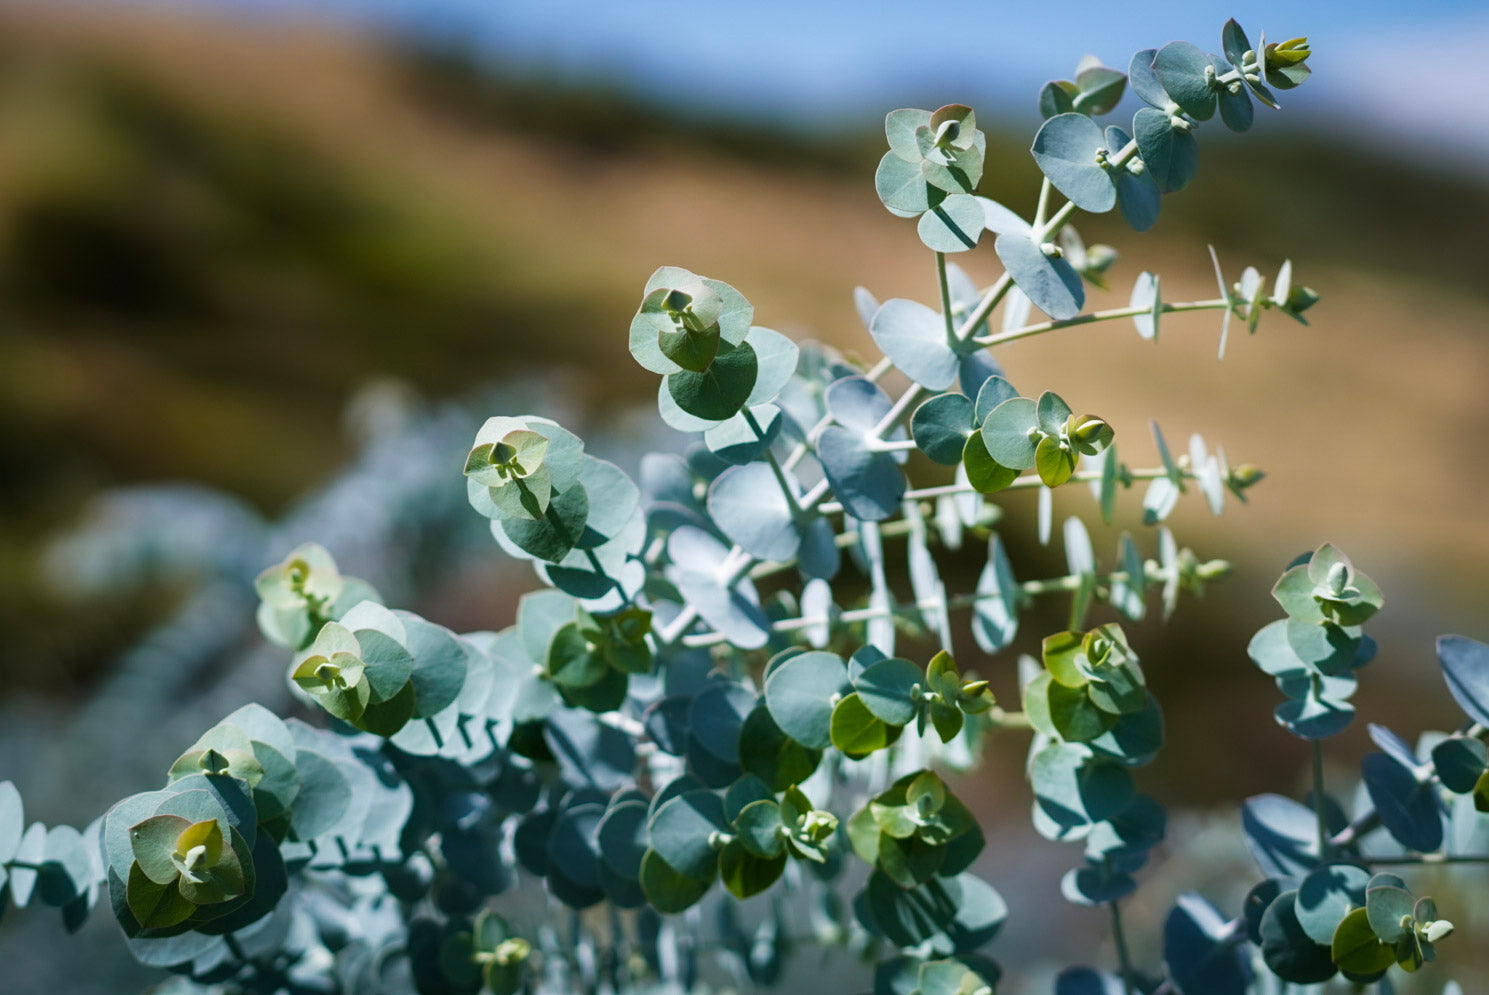 Baby Blue Eucalyptus is one of the most popular and wonderfully scented varieties that we grow on our San Diego farms